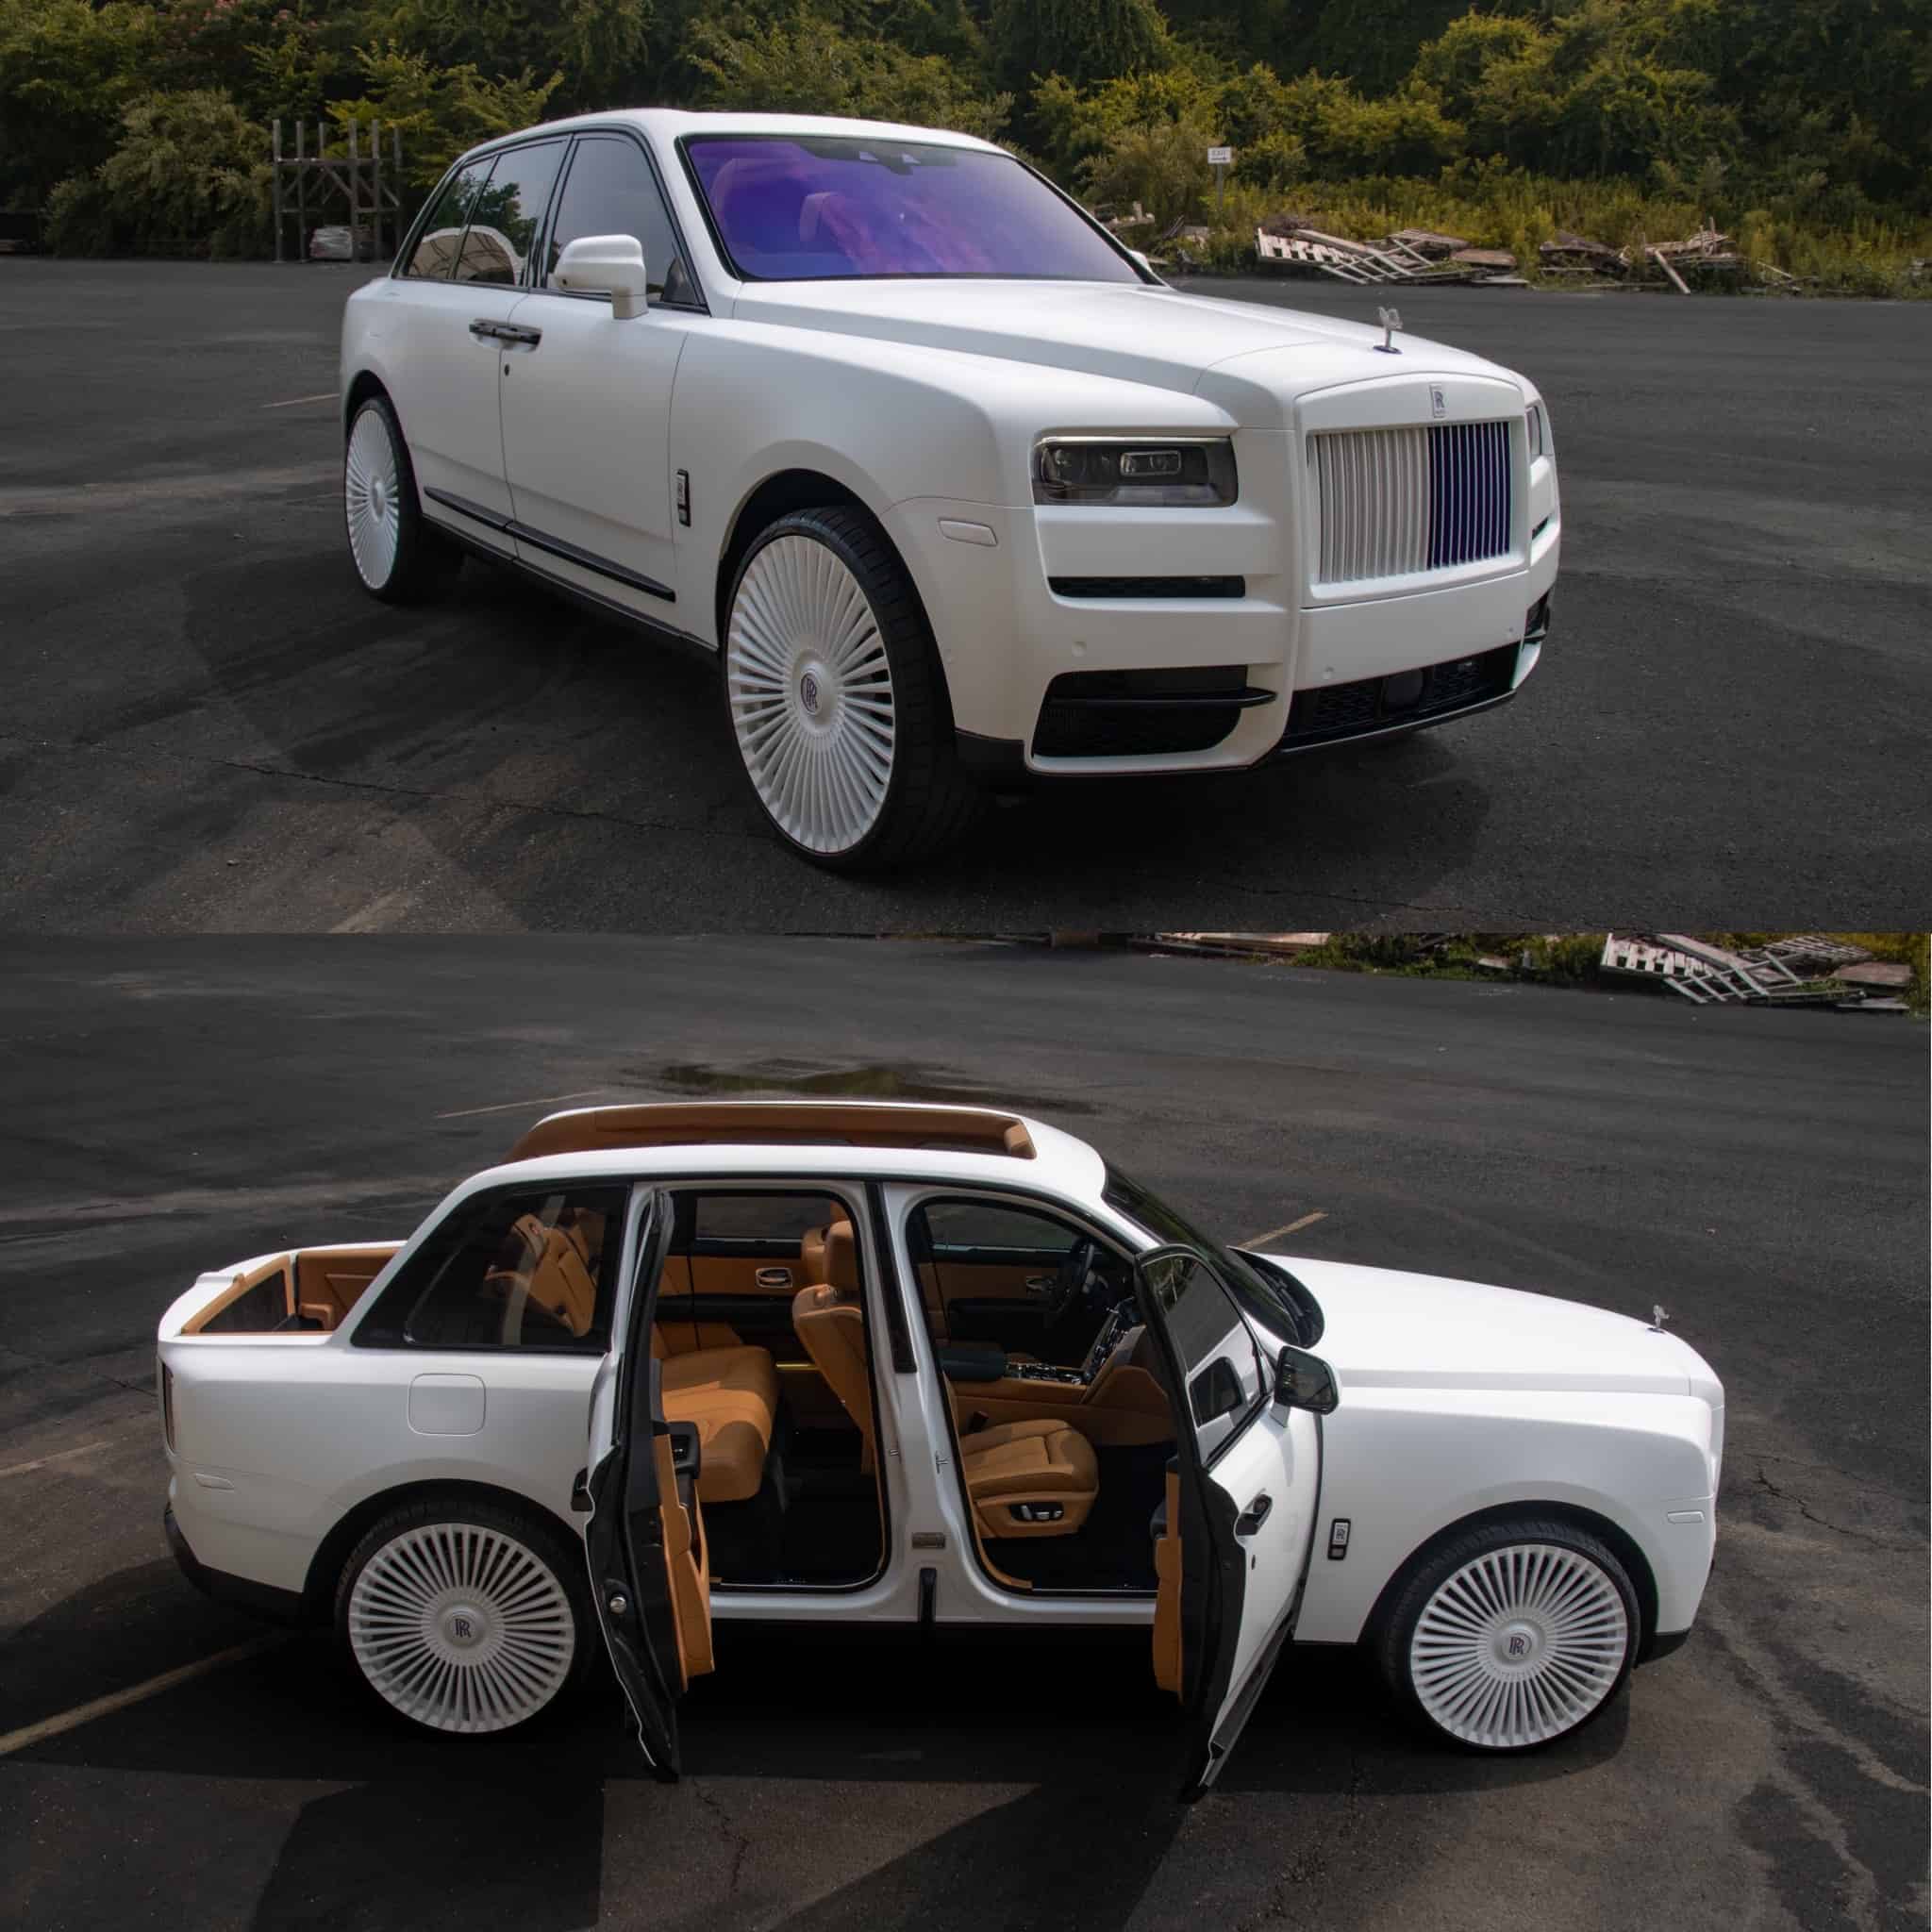 This Custom Rolls-Royce Cullinan Convertible is a Wild Project